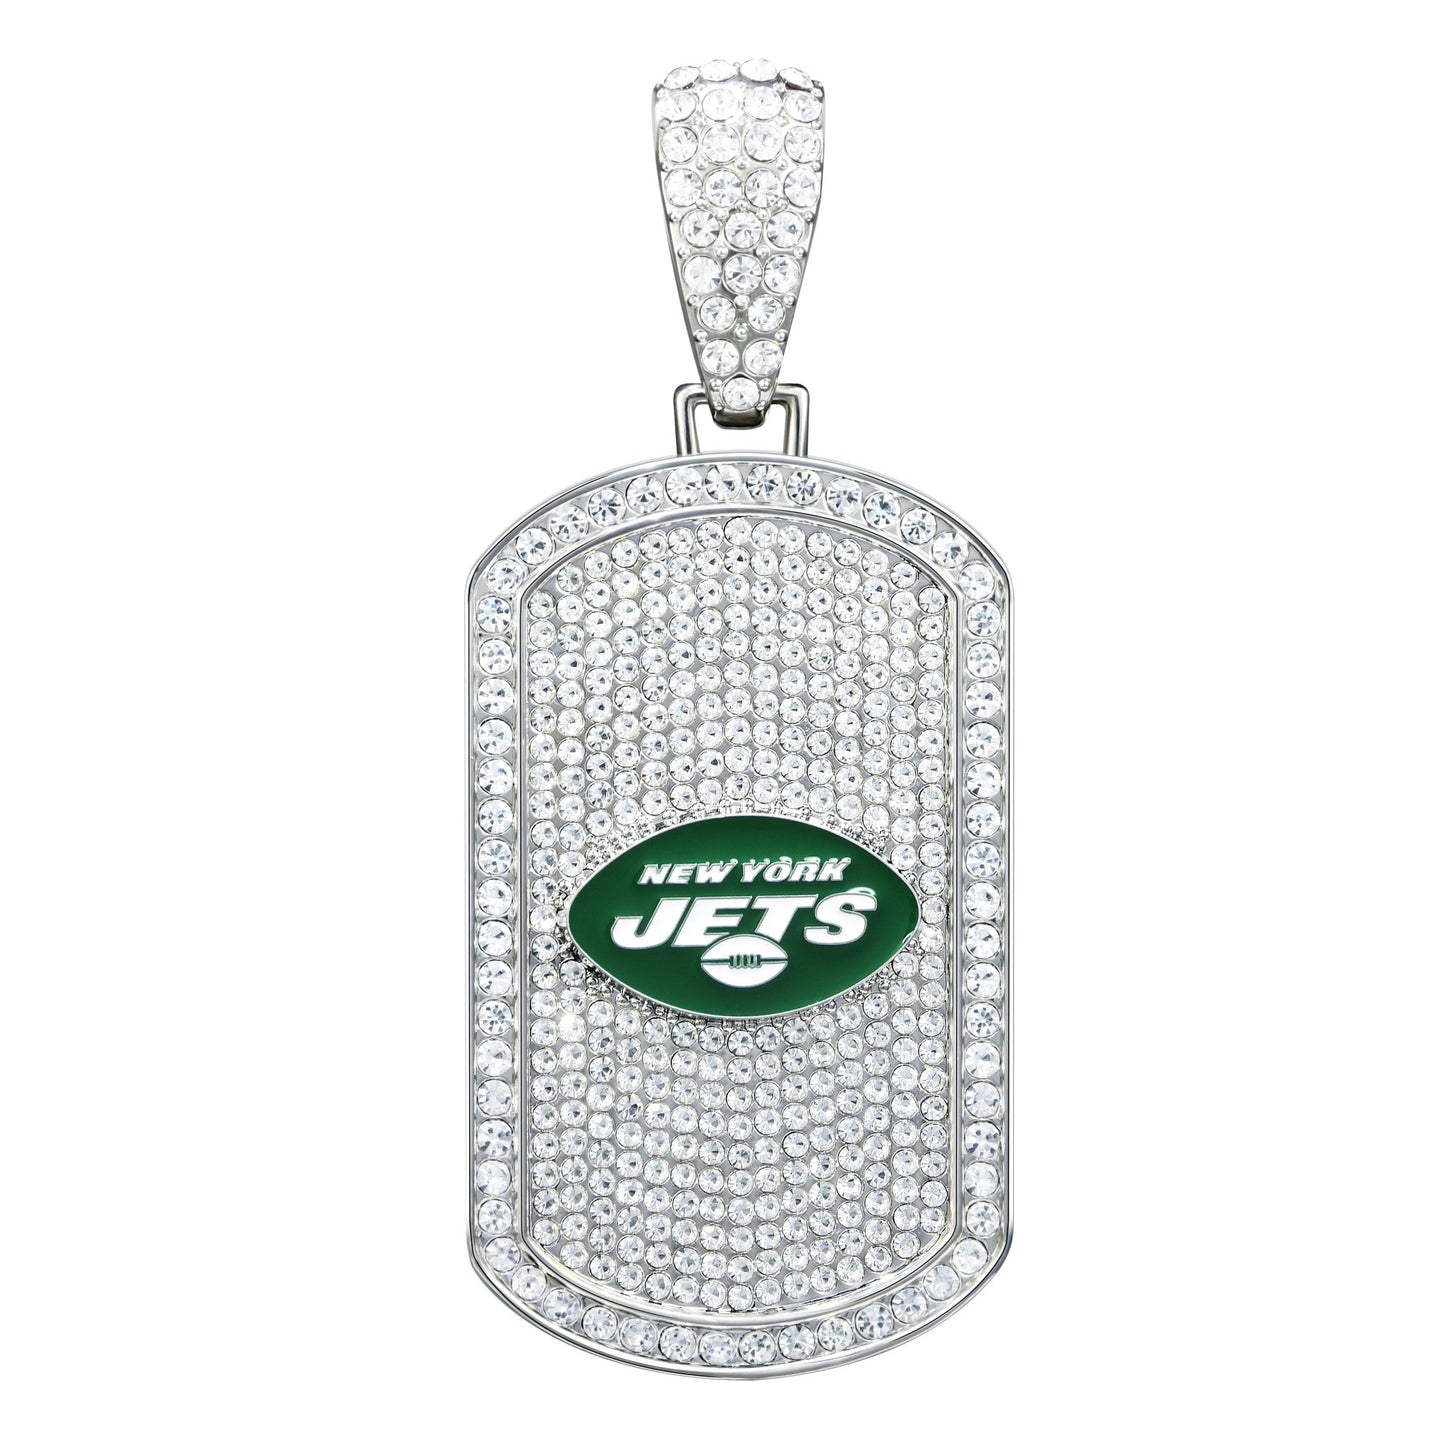 NFL Bling Dog Tag Necklace - Gamedays Gear - New York Jets